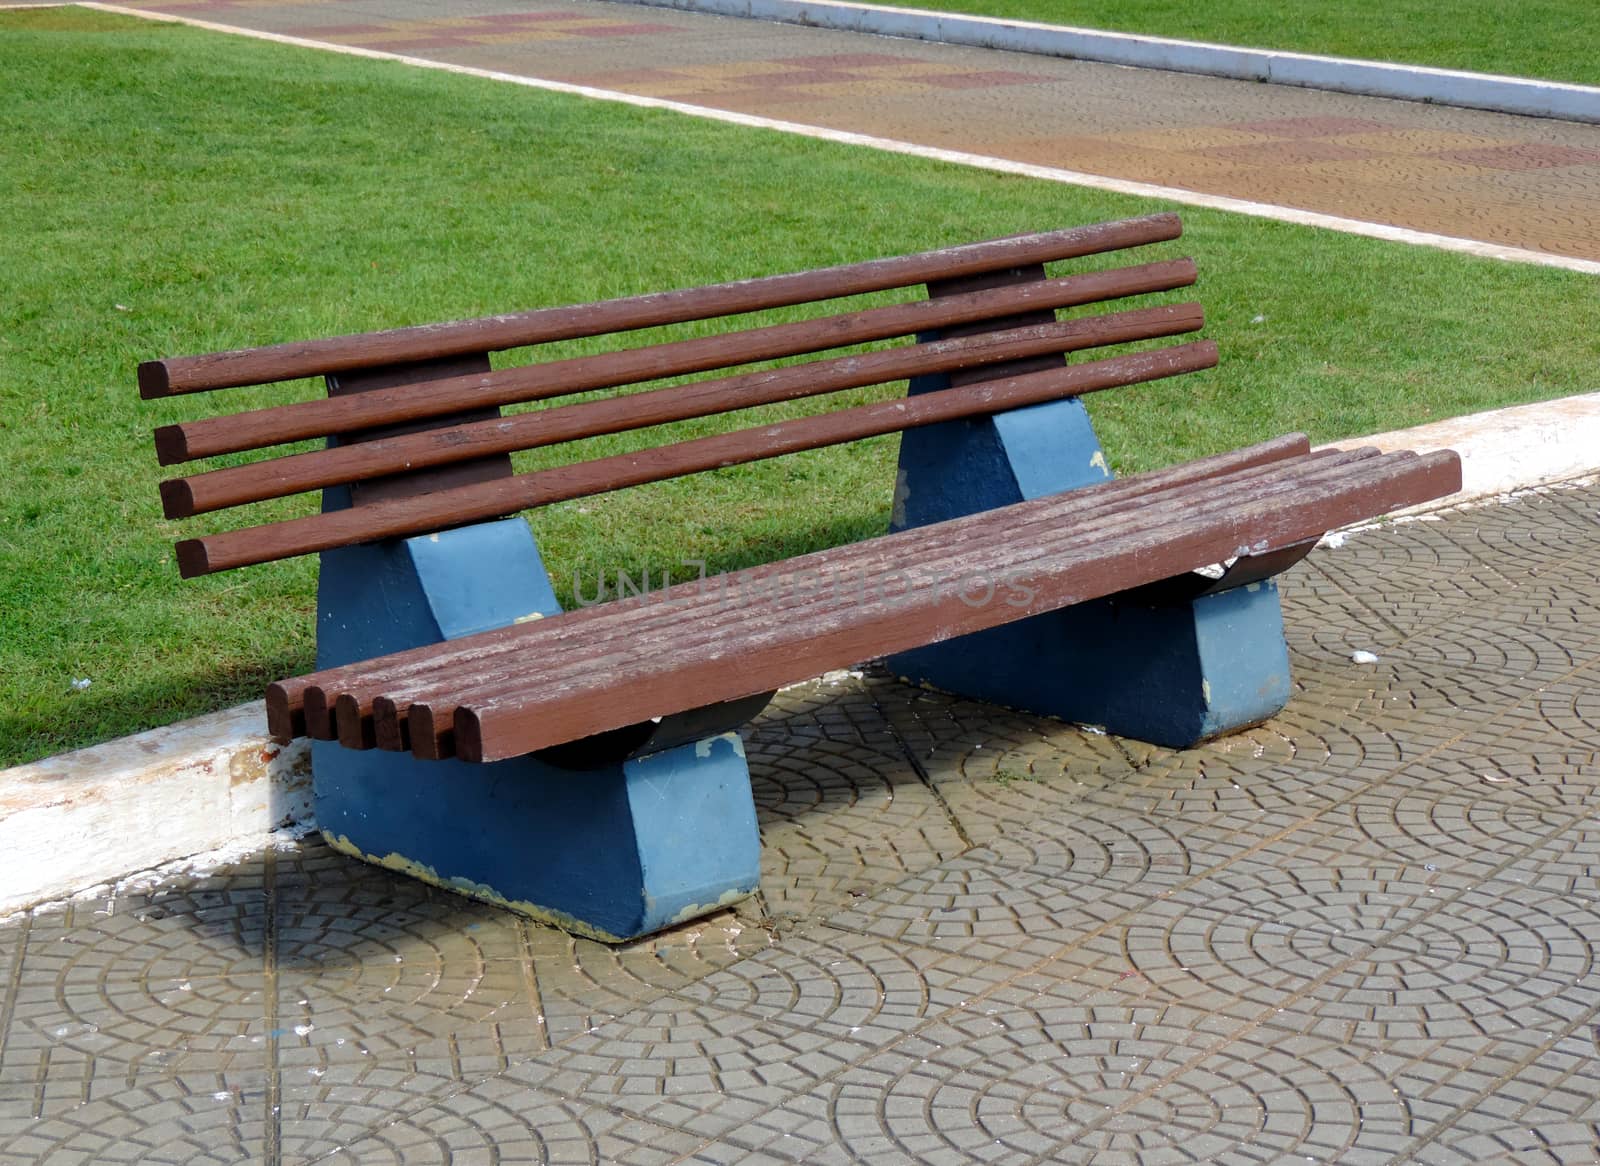 A wooden bench in the city park